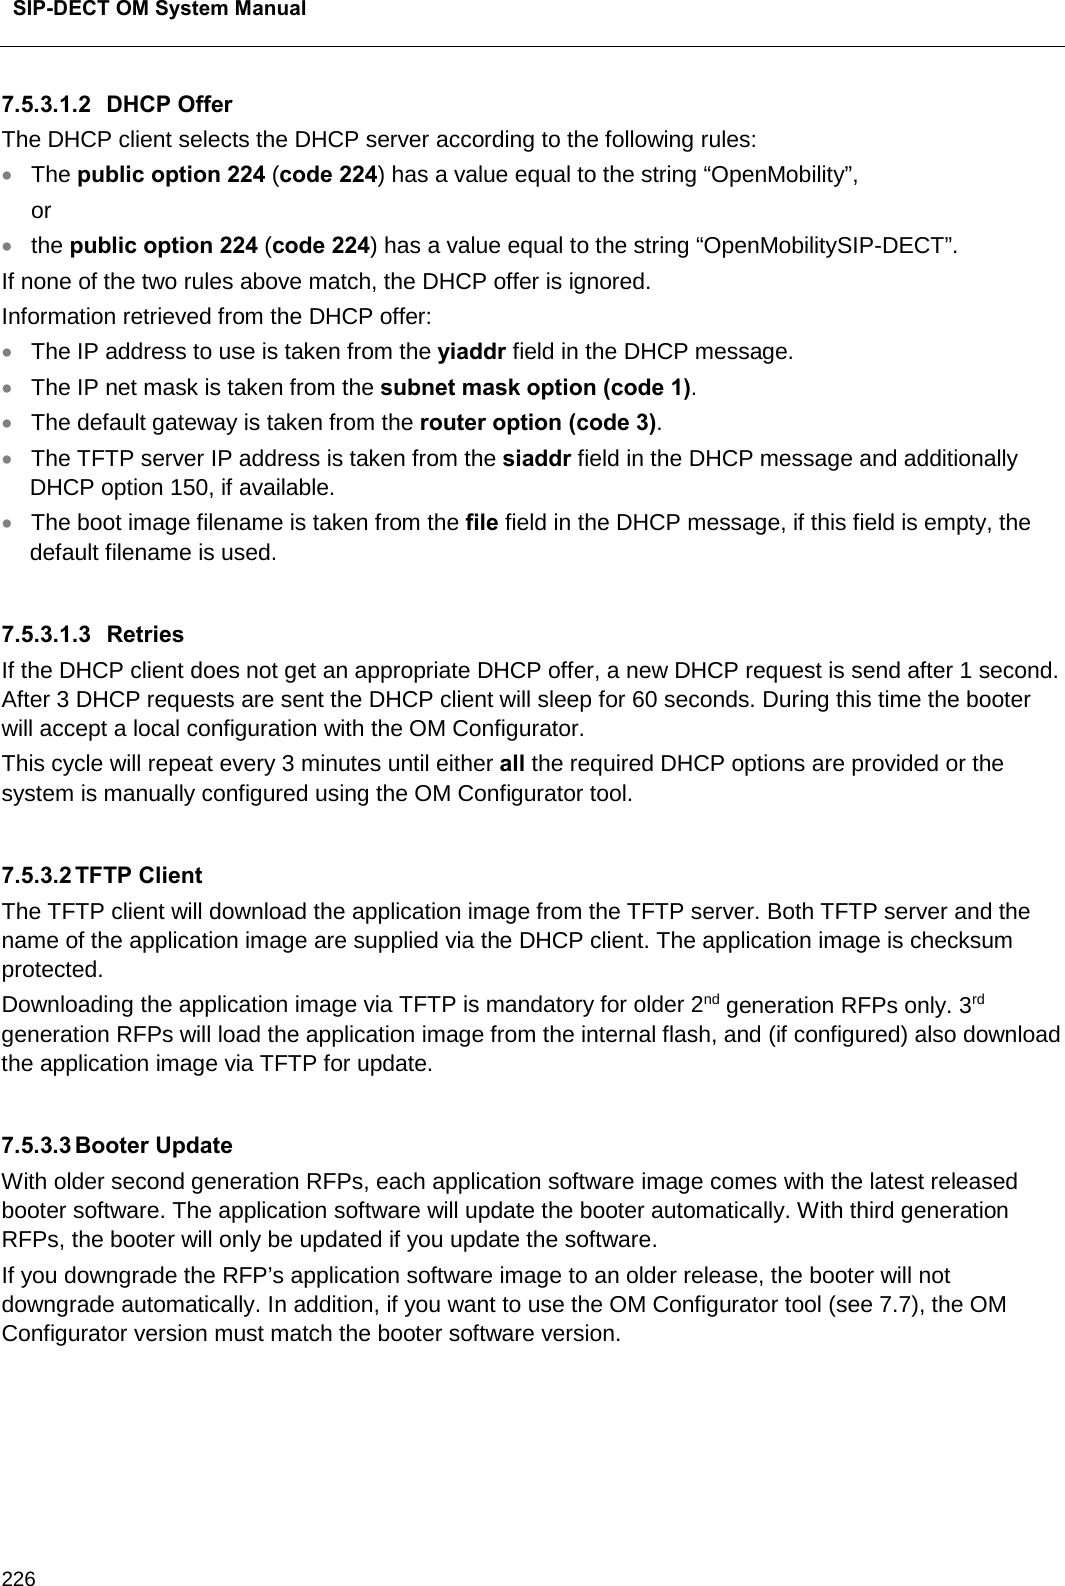  SIP-DECT OM System Manual    226 7.5.3.1.2 DHCP Offer The DHCP client selects the DHCP server according to the following rules: • The public option 224 (code 224) has a value equal to the string “OpenMobility”, or • the public option 224 (code 224) has a value equal to the string “OpenMobilitySIP-DECT”. If none of the two rules above match, the DHCP offer is ignored. Information retrieved from the DHCP offer: • The IP address to use is taken from the yiaddr field in the DHCP message. • The IP net mask is taken from the subnet mask option (code 1). • The default gateway is taken from the router option (code 3). • The TFTP server IP address is taken from the siaddr field in the DHCP message and additionally DHCP option 150, if available. • The boot image filename is taken from the file field in the DHCP message, if this field is empty, the default filename is used.  7.5.3.1.3 Retries If the DHCP client does not get an appropriate DHCP offer, a new DHCP request is send after 1 second. After 3 DHCP requests are sent the DHCP client will sleep for 60 seconds. During this time the booter will accept a local configuration with the OM Configurator. This cycle will repeat every 3 minutes until either all the required DHCP options are provided or the system is manually configured using the OM Configurator tool.  7.5.3.2 TFTP Client The TFTP client will download the application image from the TFTP server. Both TFTP server and the name of the application image are supplied via the DHCP client. The application image is checksum protected. Downloading the application image via TFTP is mandatory for older 2nd generation RFPs only. 3rd generation RFPs will load the application image from the internal flash, and (if configured) also download the application image via TFTP for update.  7.5.3.3 Booter Update With older second generation RFPs, each application software image comes with the latest released booter software. The application software will update the booter automatically. With third generation RFPs, the booter will only be updated if you update the software. If you downgrade the RFP’s application software image to an older release, the booter will not downgrade automatically. In addition, if you want to use the OM Configurator tool (see 7.7), the OM Configurator version must match the booter software version.   